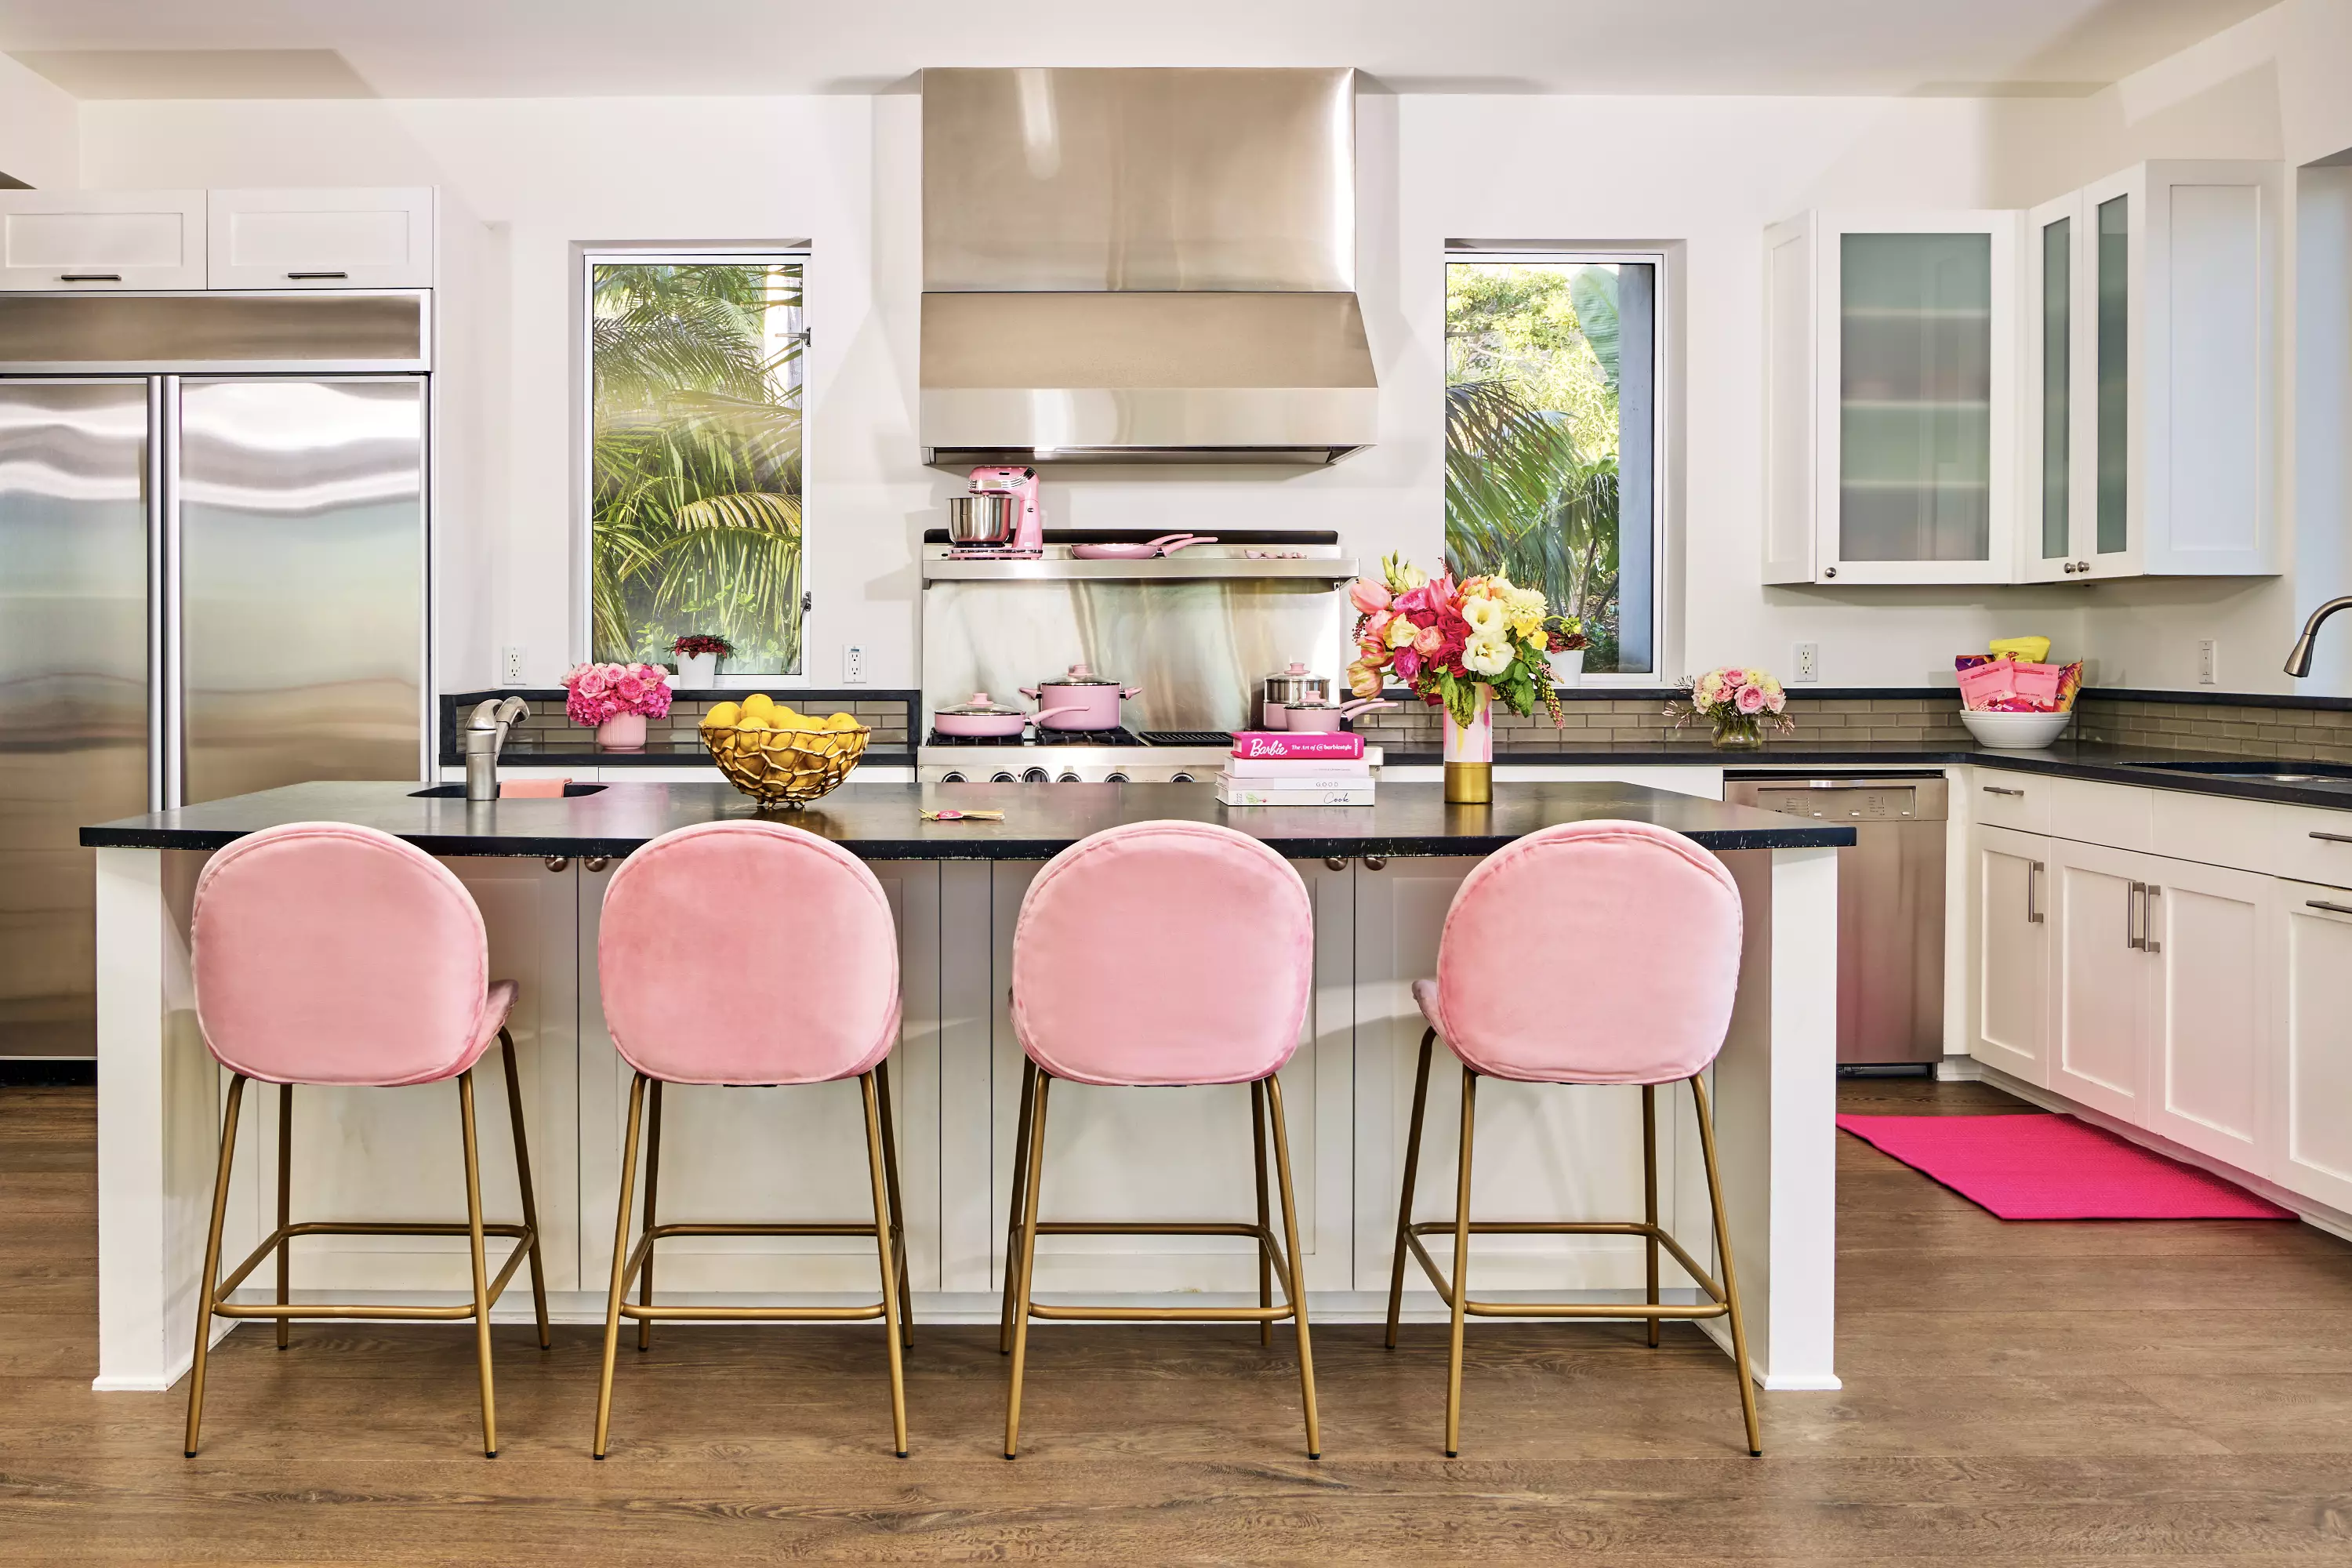 The kitchen features pink accents and velvet pink bar stools, though you won't be doing much cook as there's a private cooking lesson. (